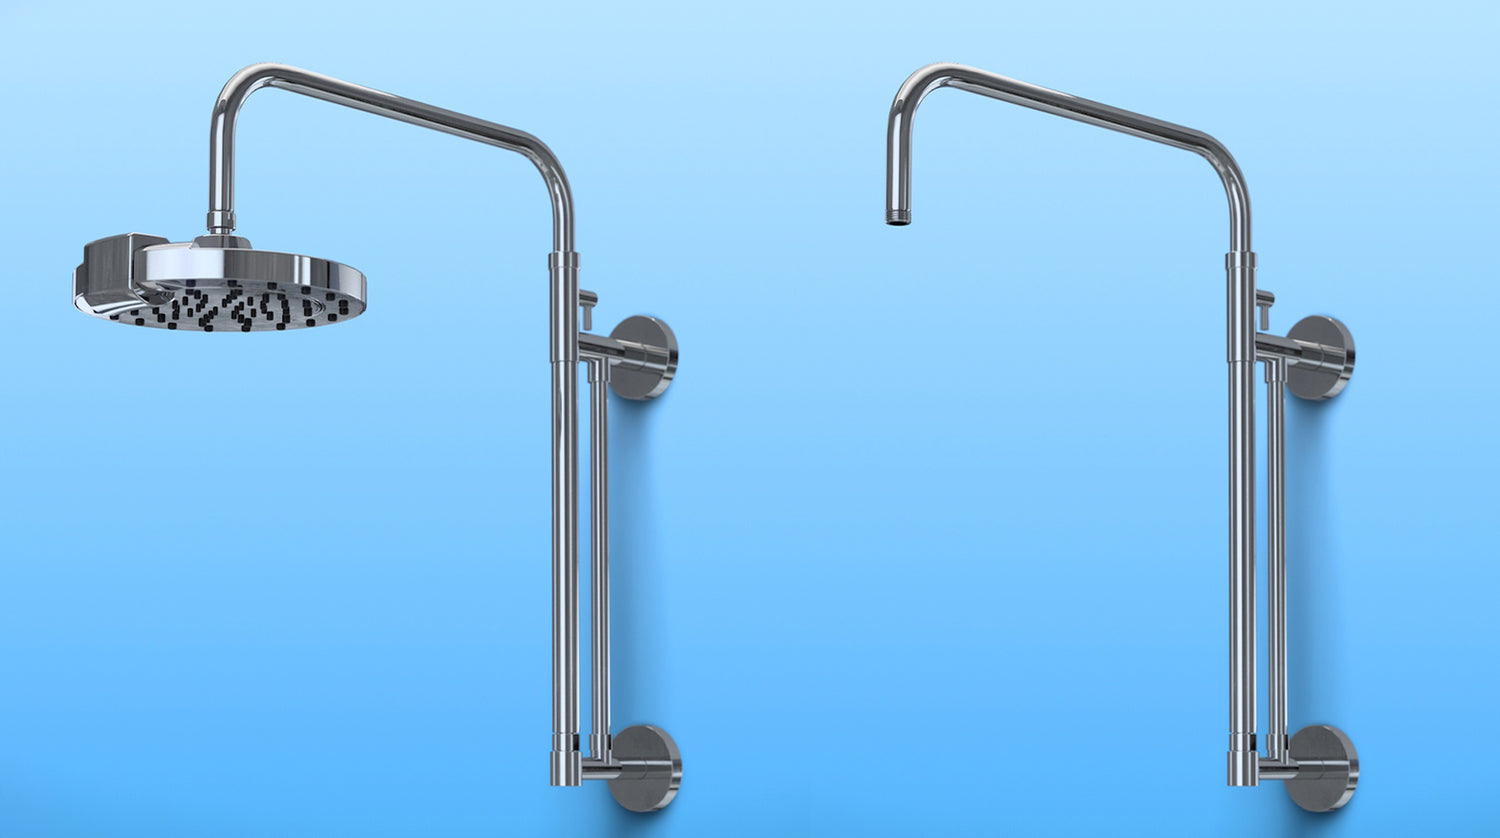 Showing the shower head and the shower arm side by side, letting you know you can customize your experience.